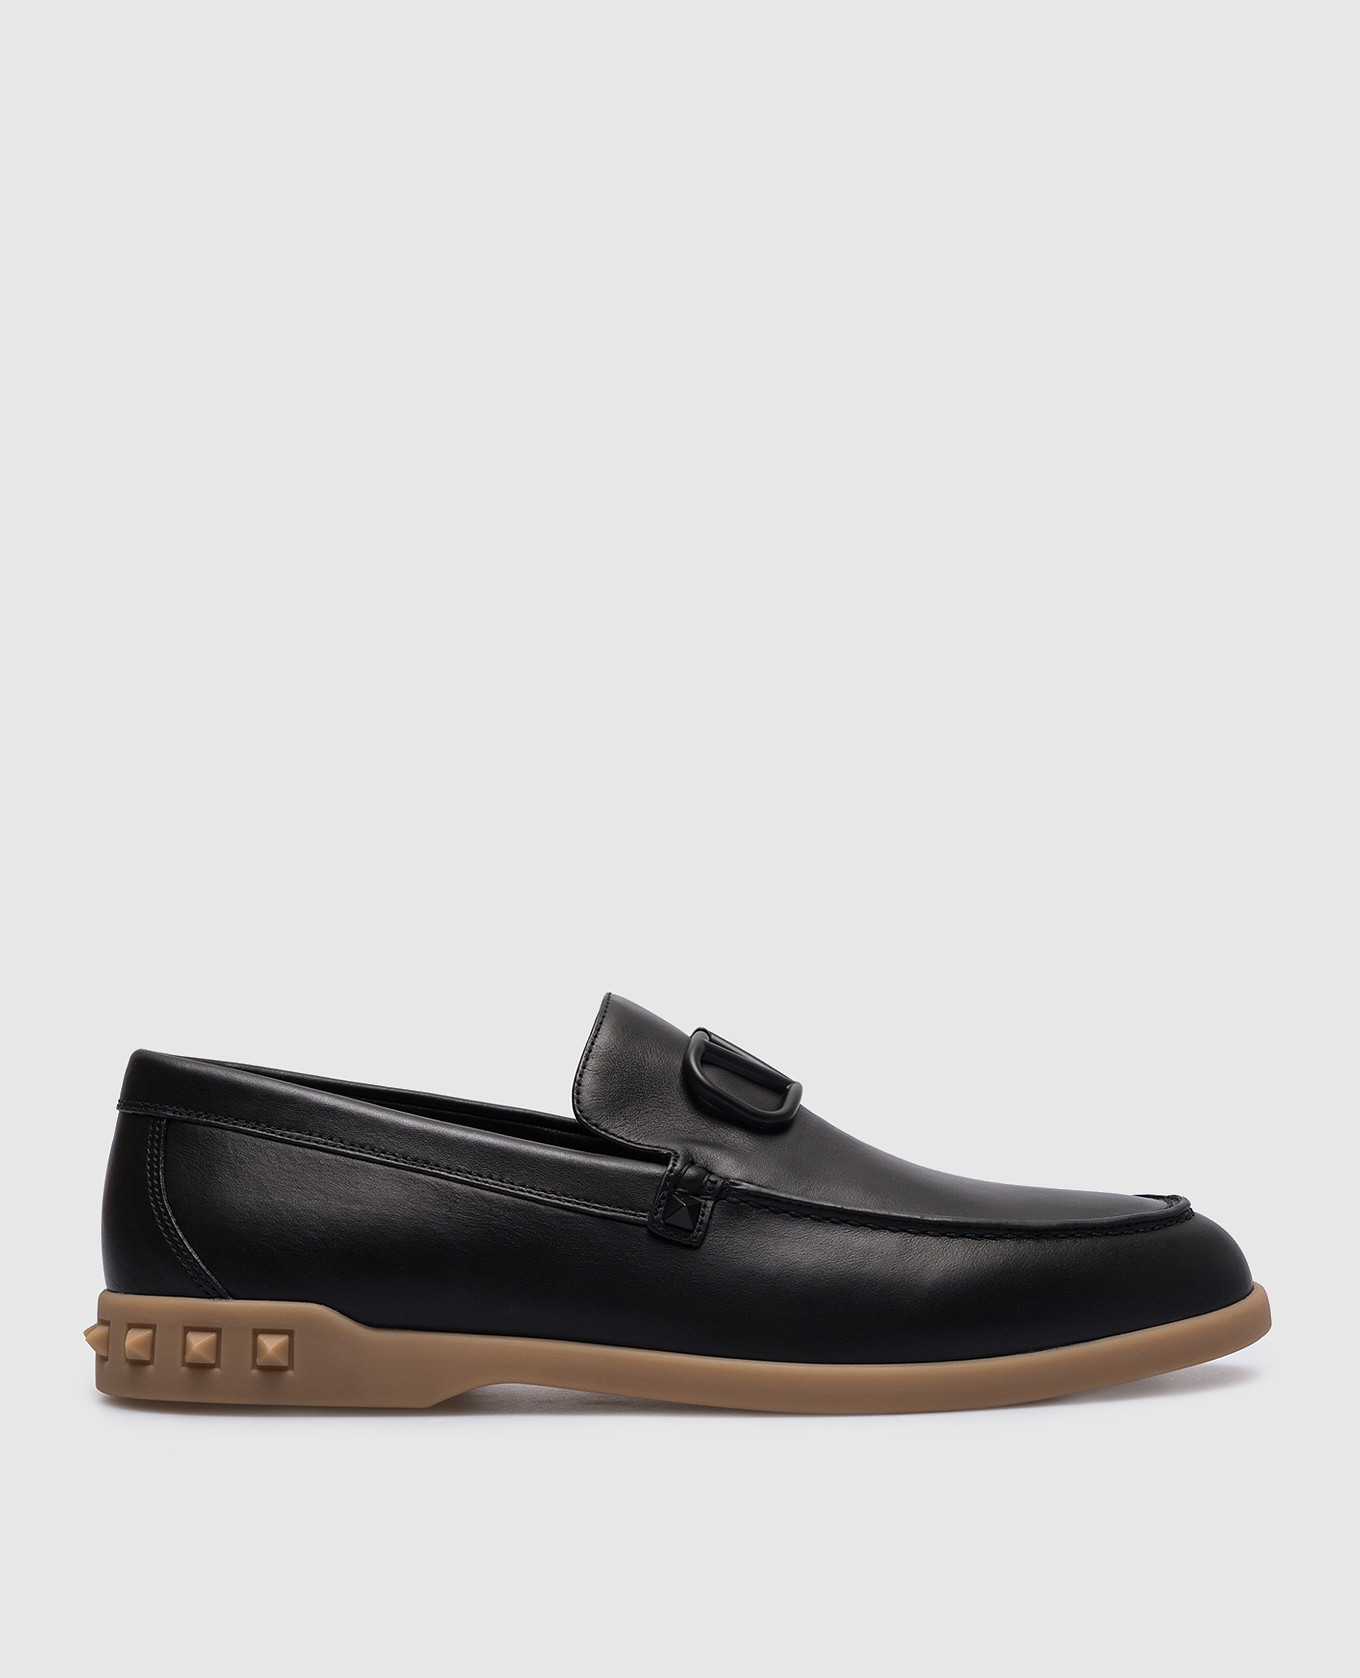 Leisure Flows black leather loafers